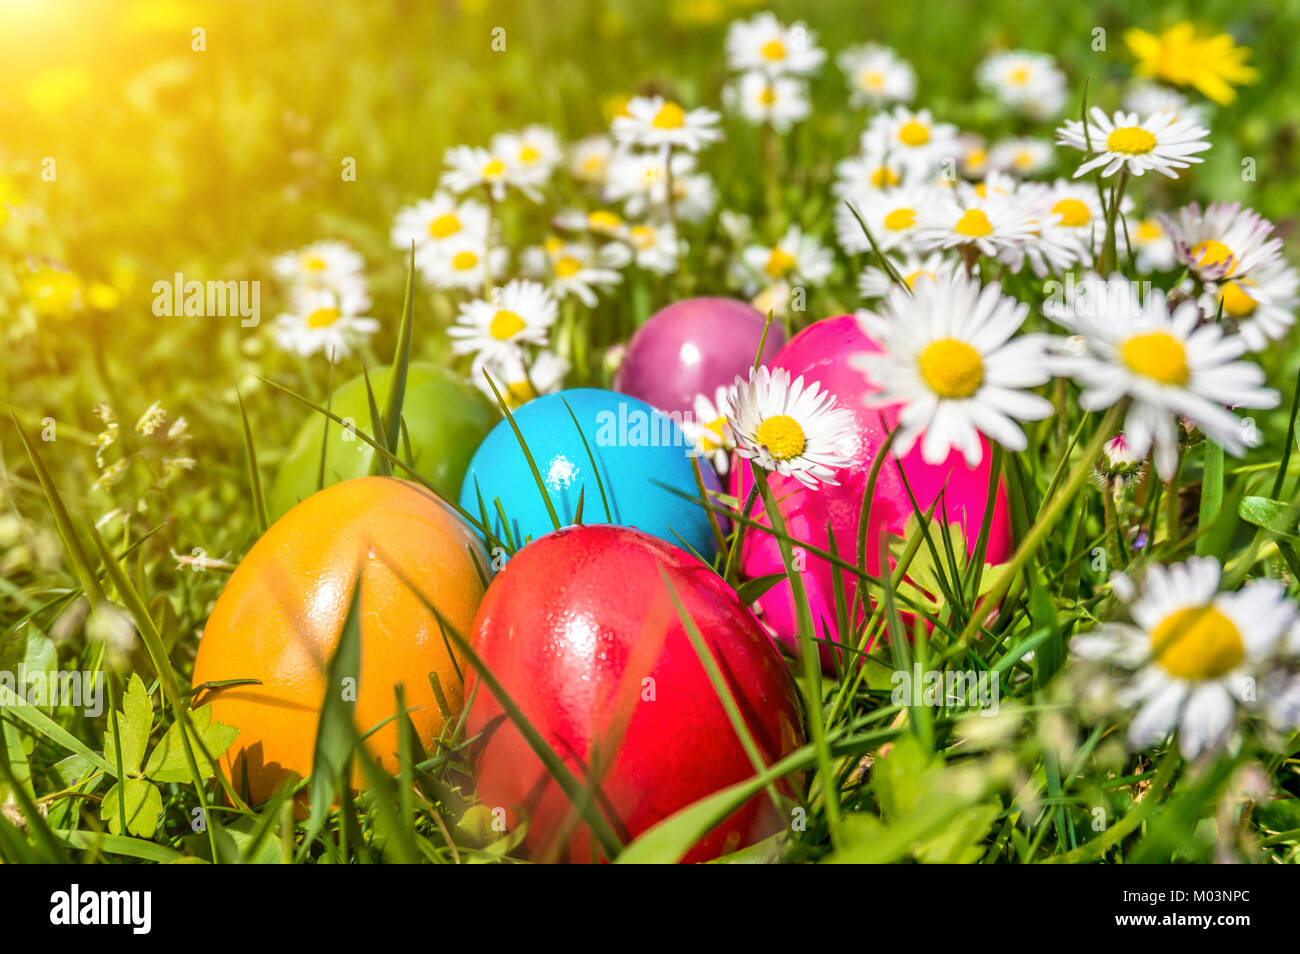 Beautiful view of colorful Easter eggs lying in the grass between daisies and dandelions in the sunshine Stock Photo